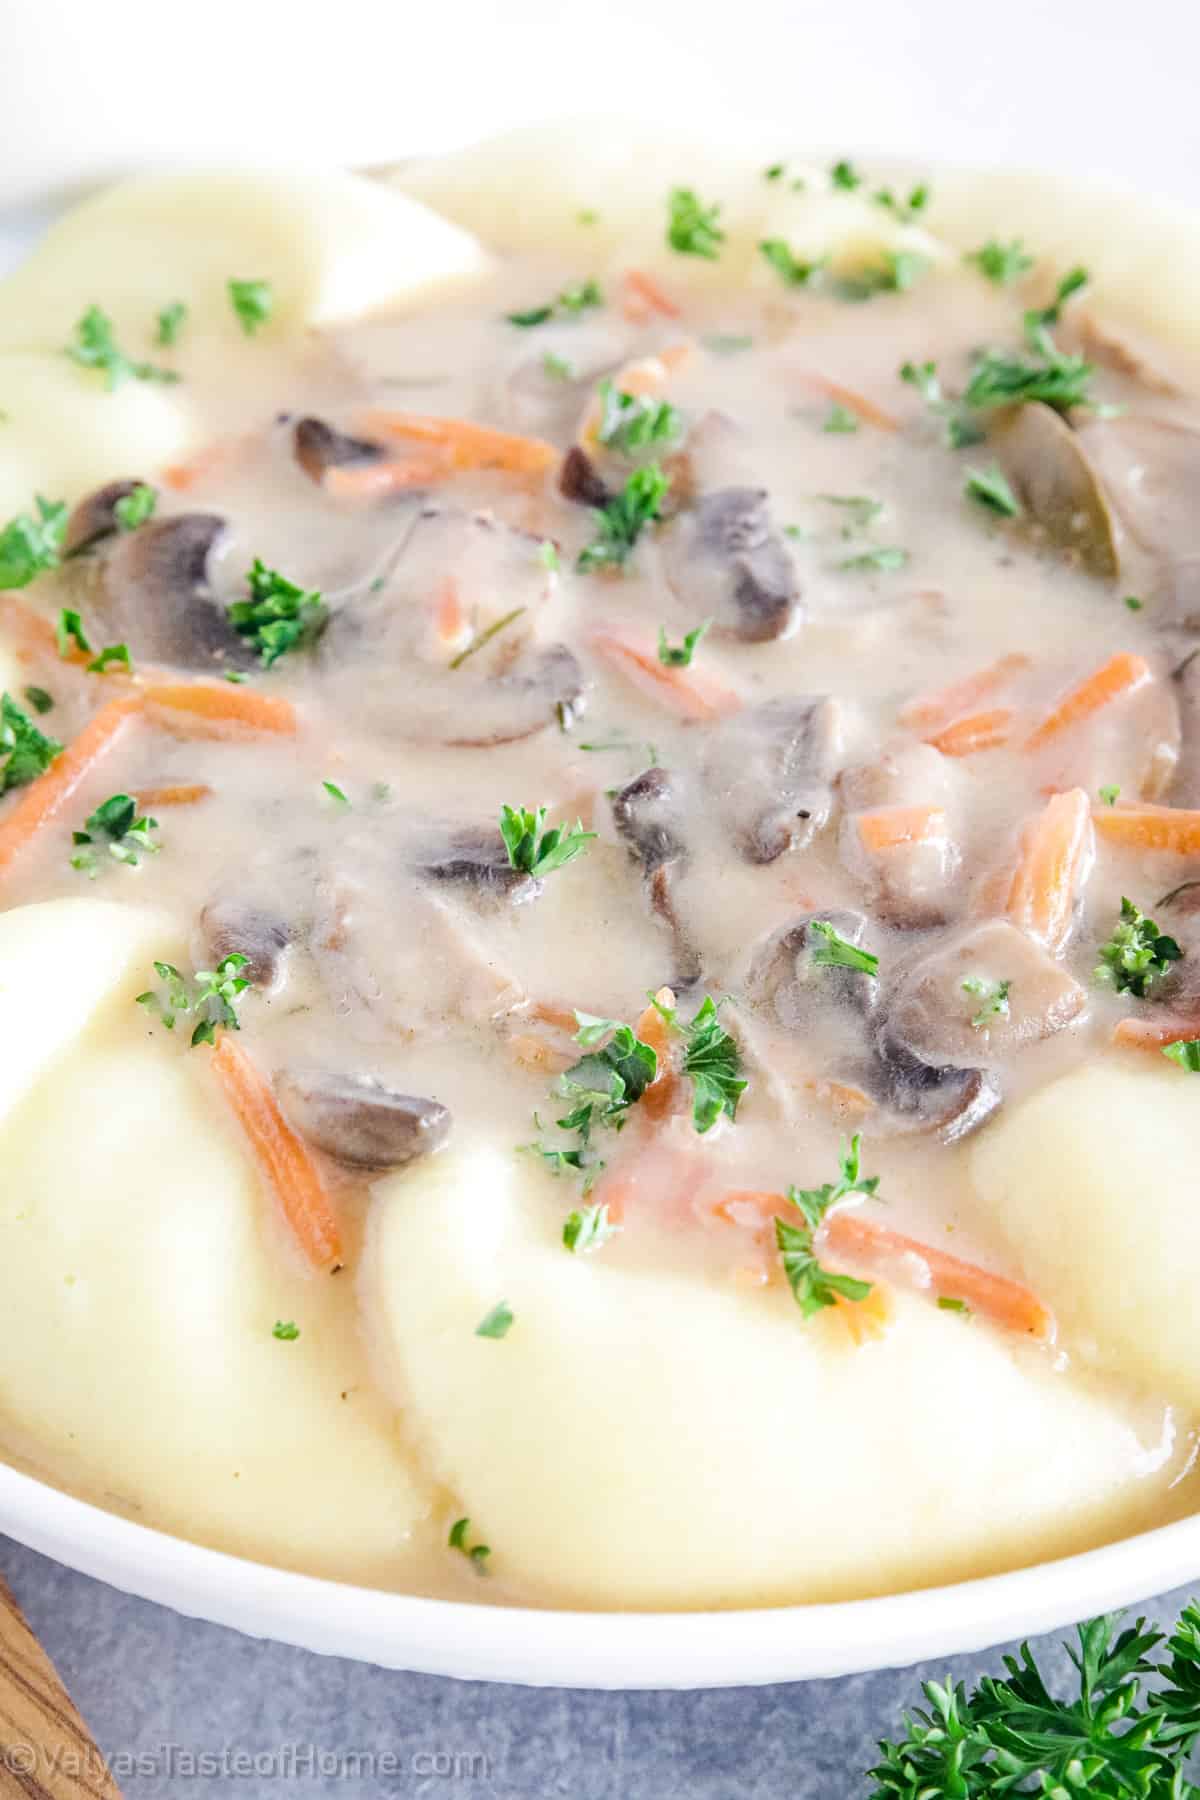 Mushroom gravy is a savory sauce usually made with mushrooms, broth or bouillon, and seasonings. It's very delicious as a topping for mashed potatoes, but also goes great on steak and other beef, roast chicken, pork, and even vegetables!